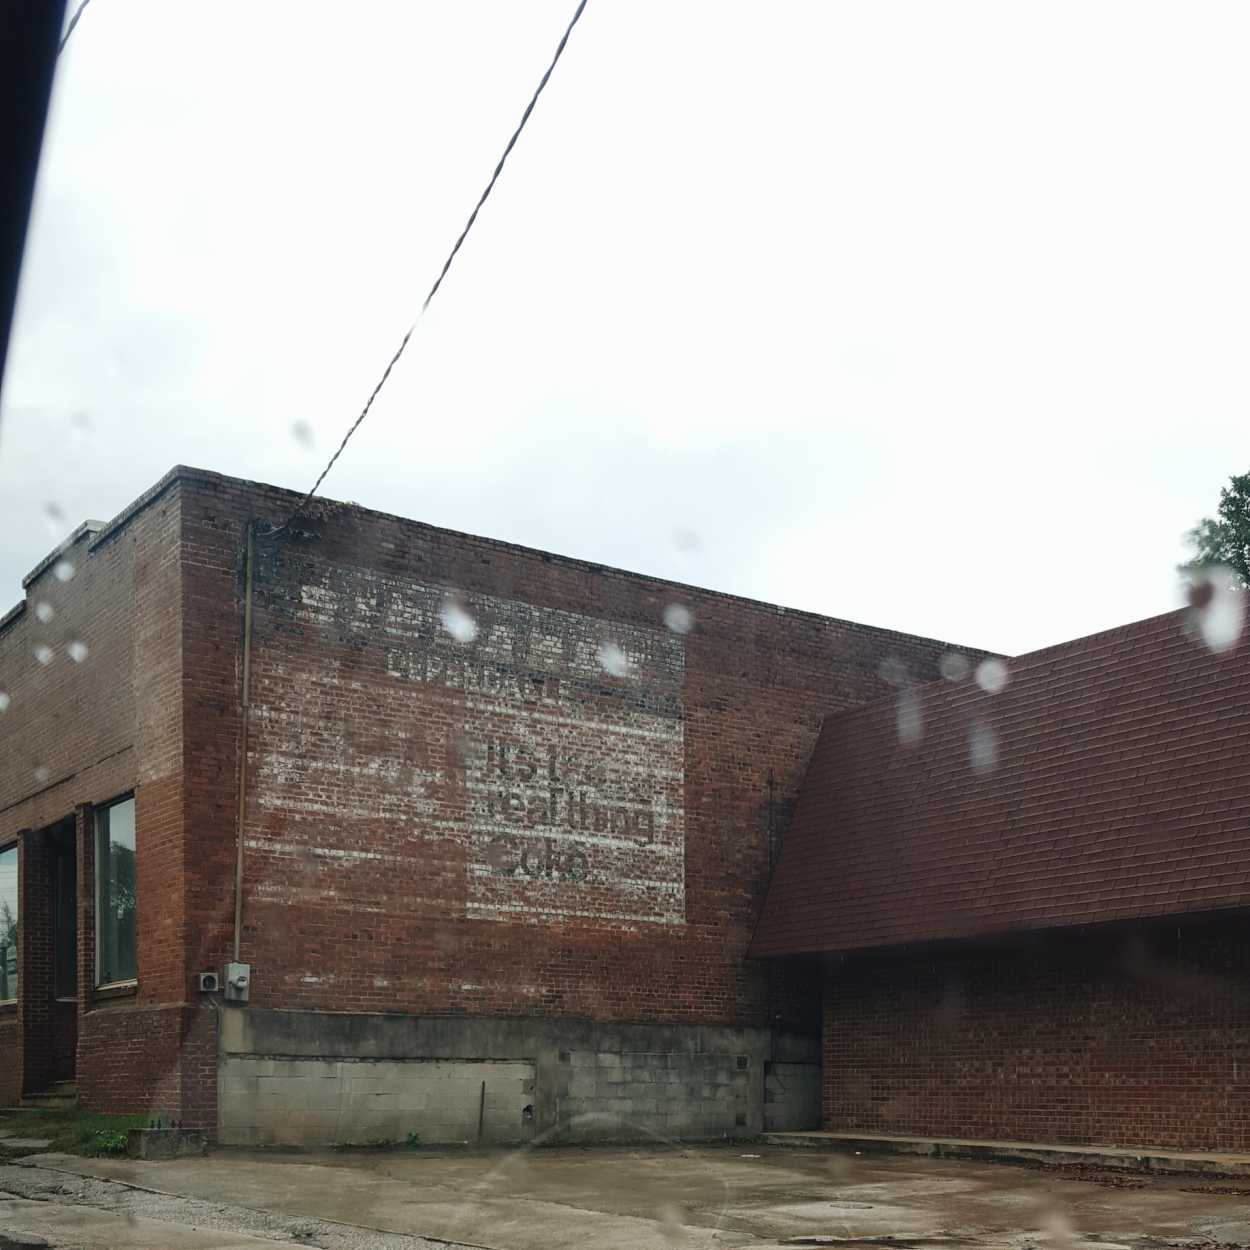 An old Coke mural on a brick building